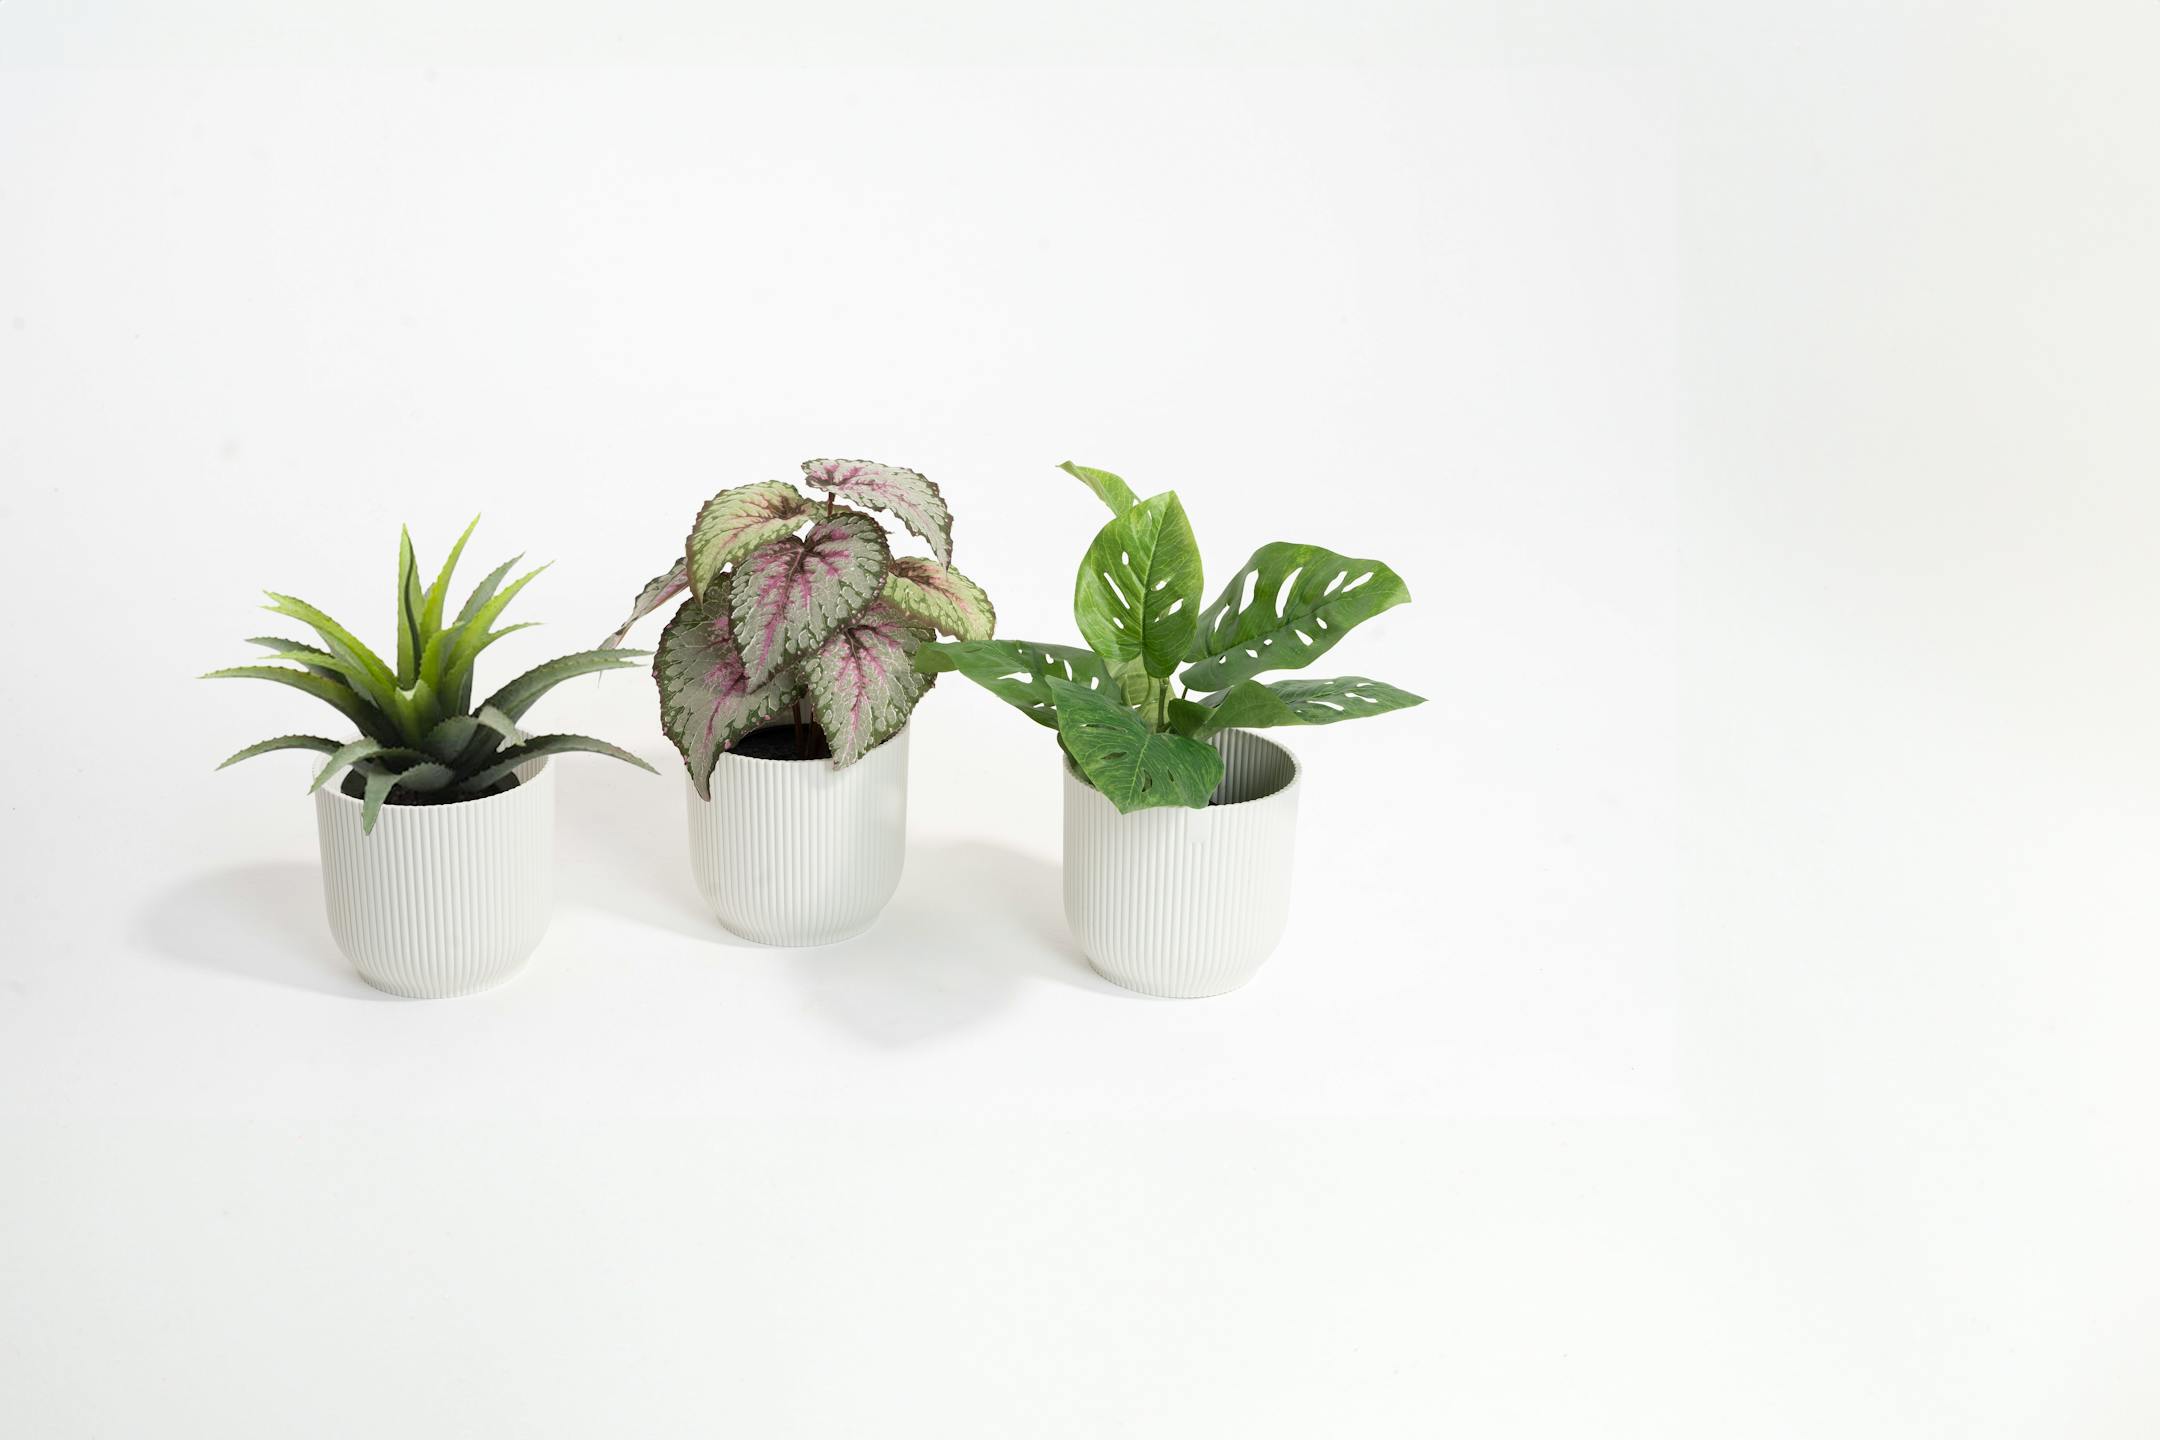 Small artificial plant pack 2